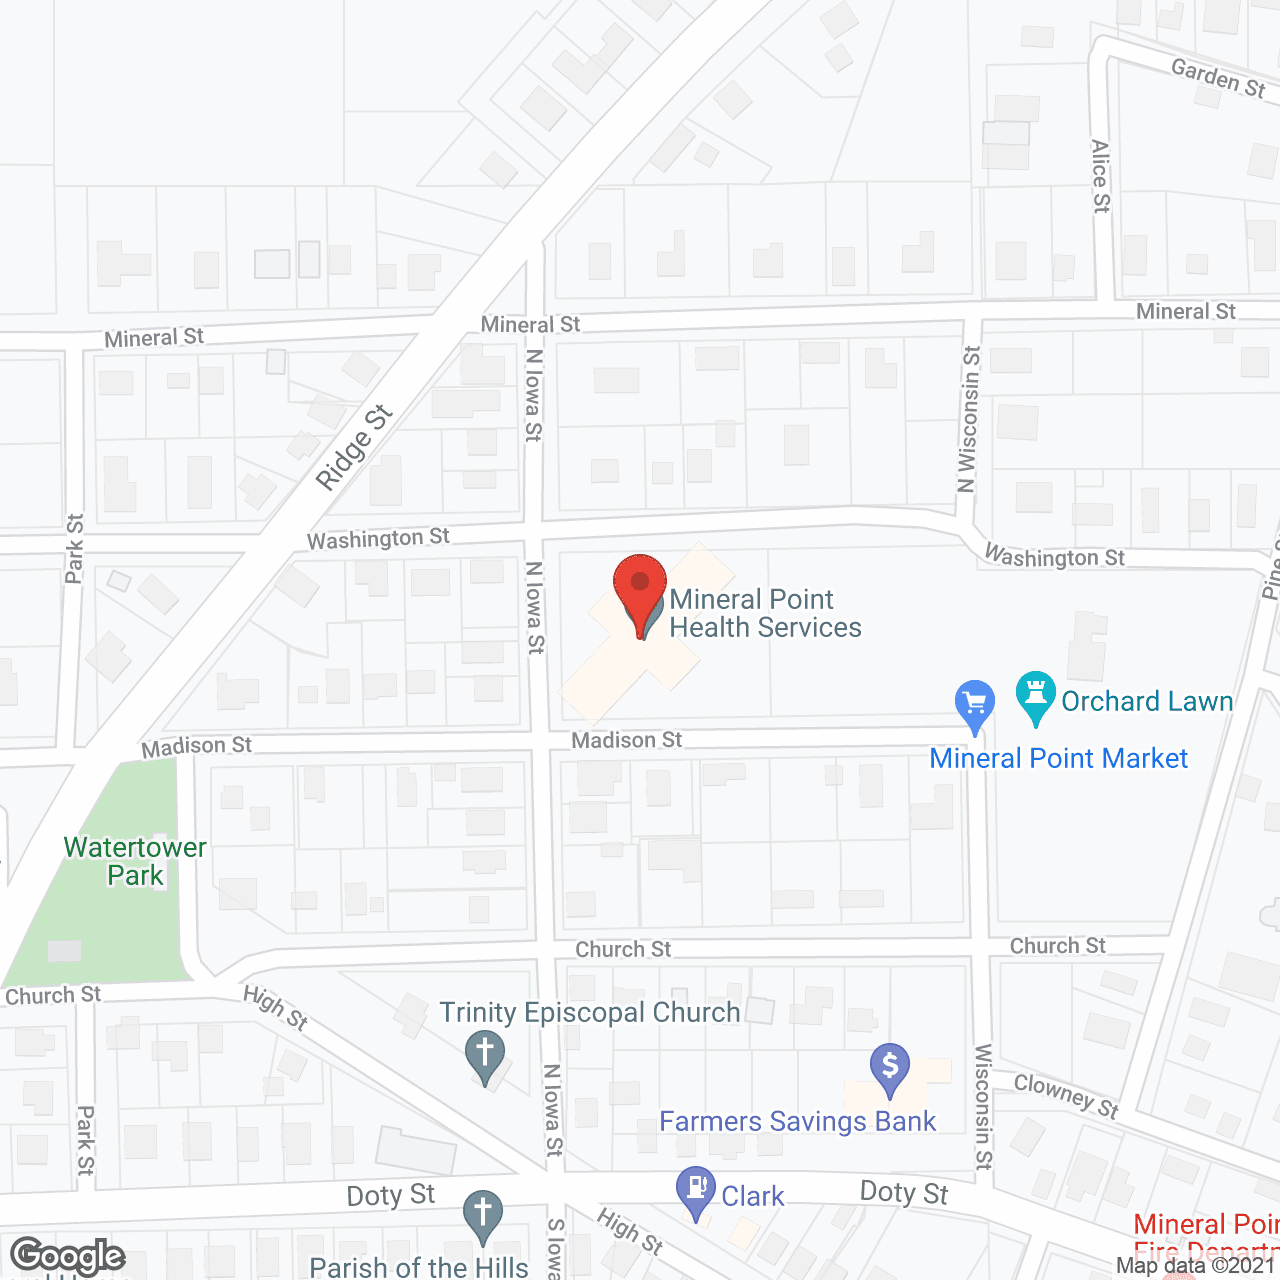 Mineral Point Care Ctr in google map